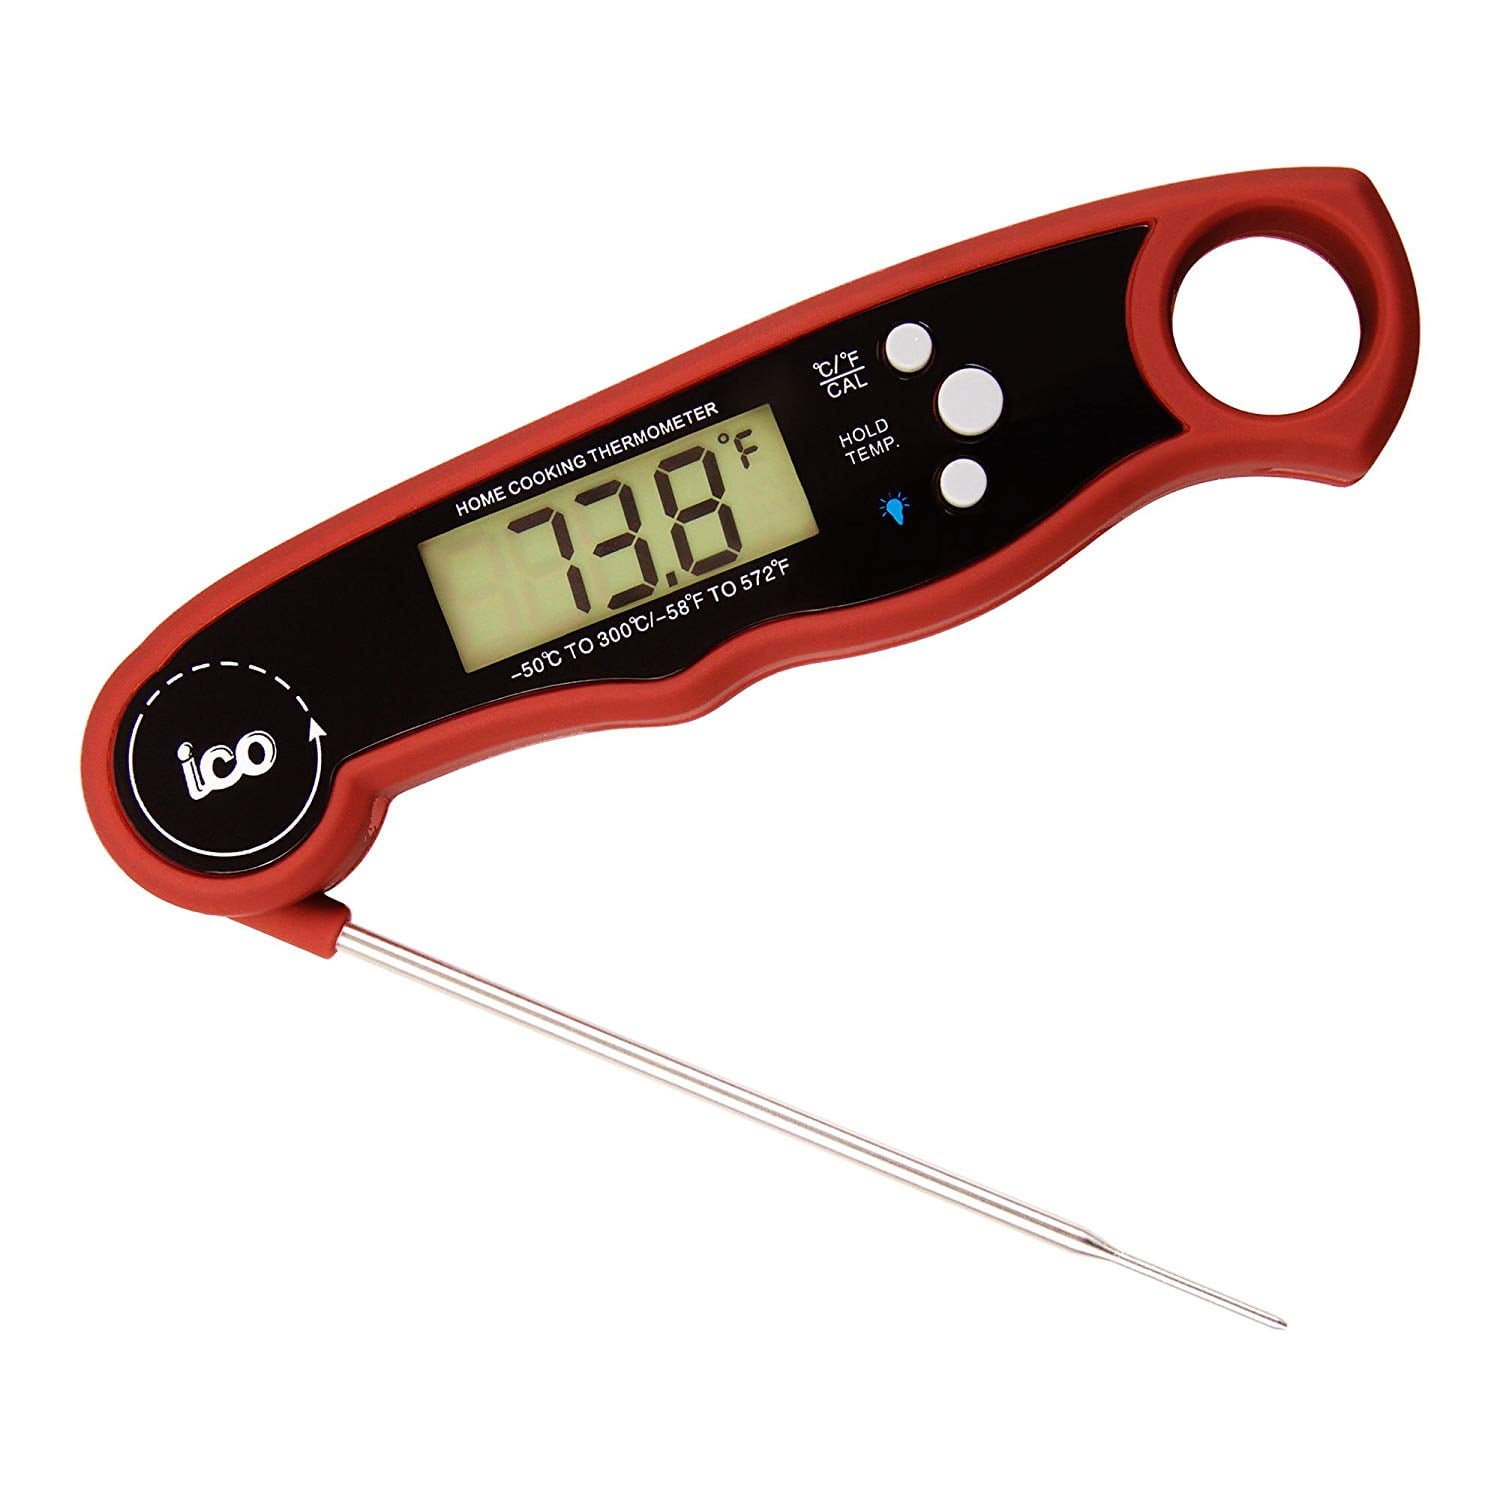 New Toy Tool - Thermapen Splash-Proof Thermometer - Food